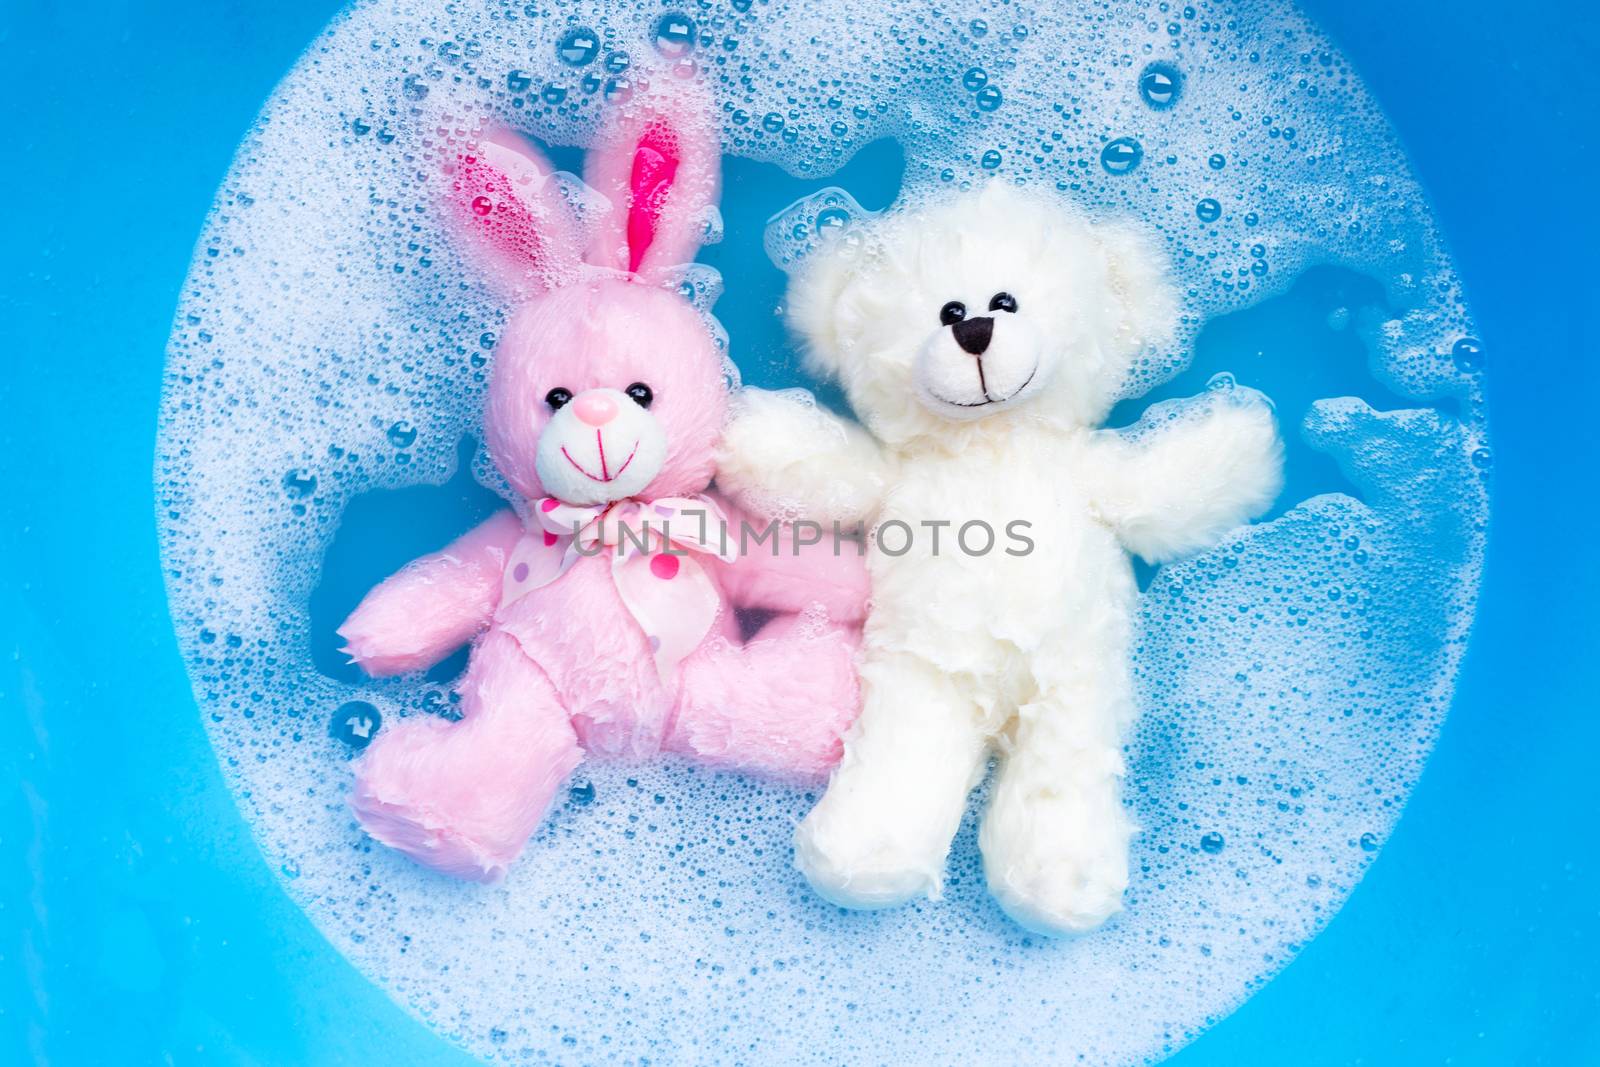 Soak rabbit doll with  toy teddy bear in laundry detergent water by Bowonpat